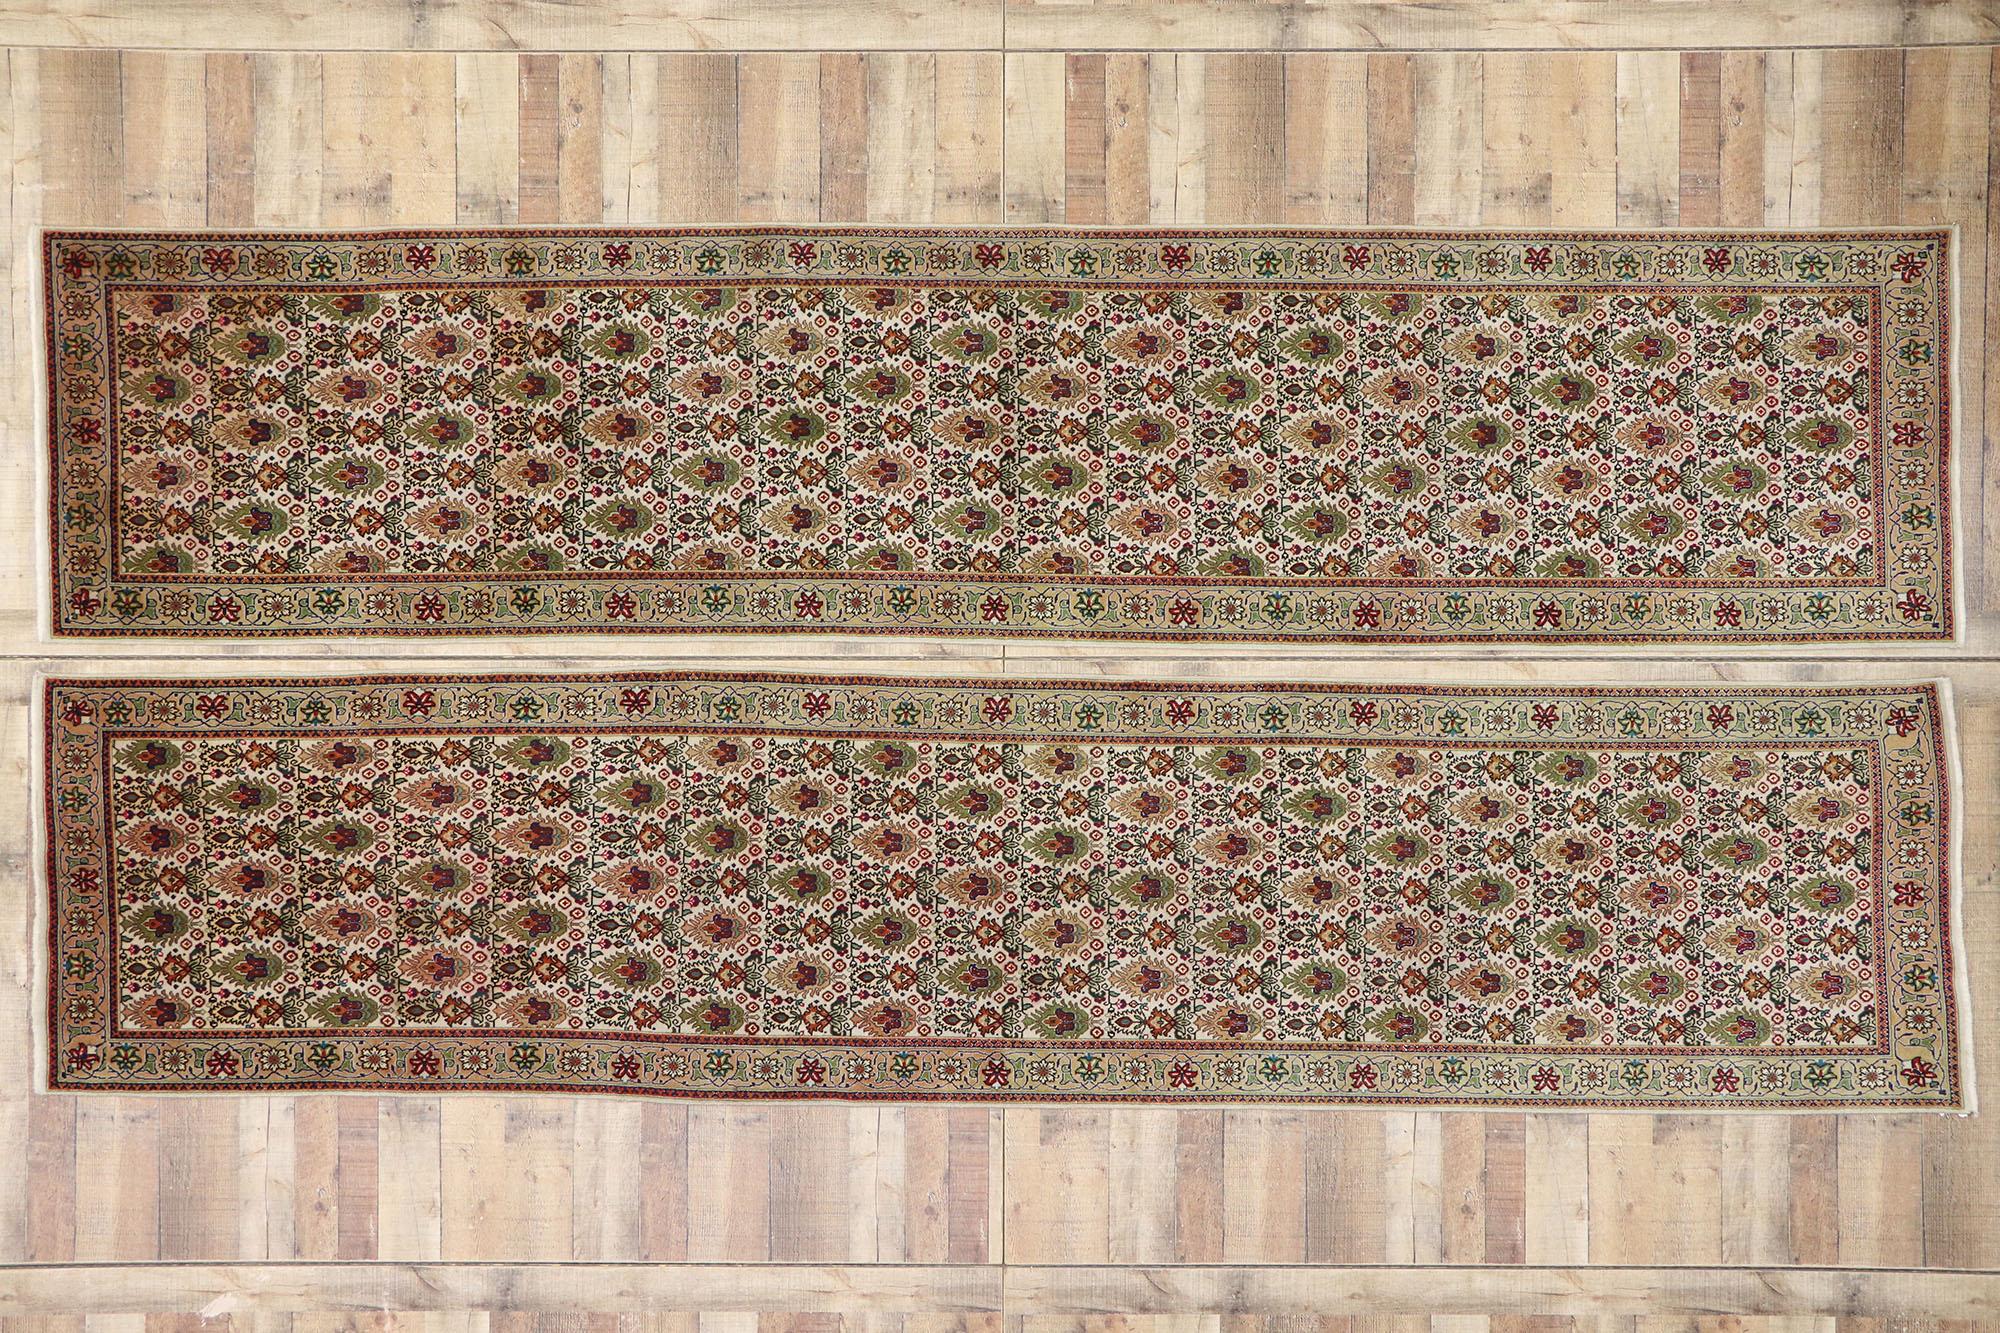 Matching Pair of Antique Persian Tabriz Runners with Arts & Crafts Style For Sale 4